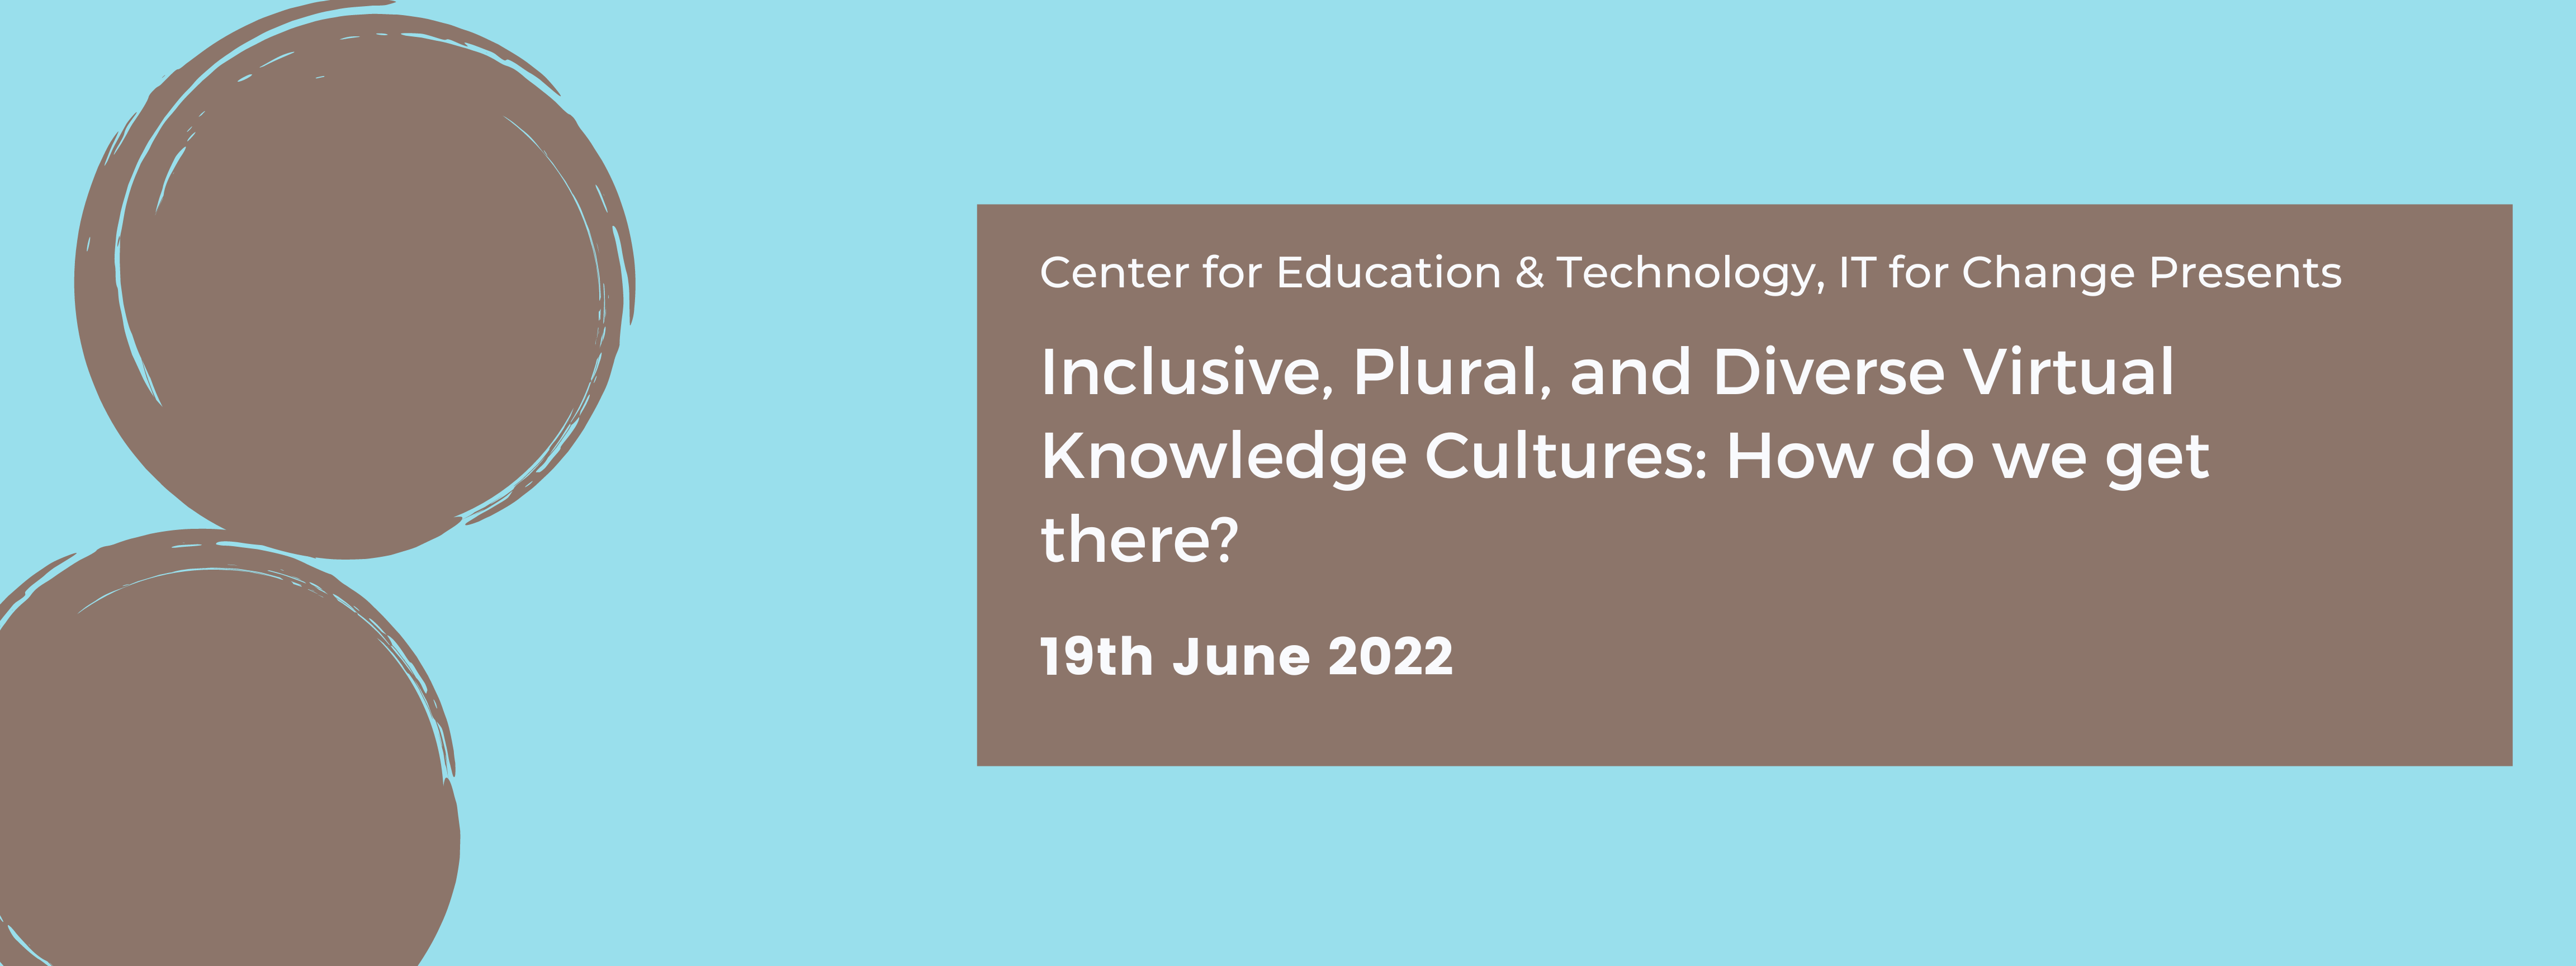 Inclusive, Plural, and Diverse Virtual Knowledge Cultures